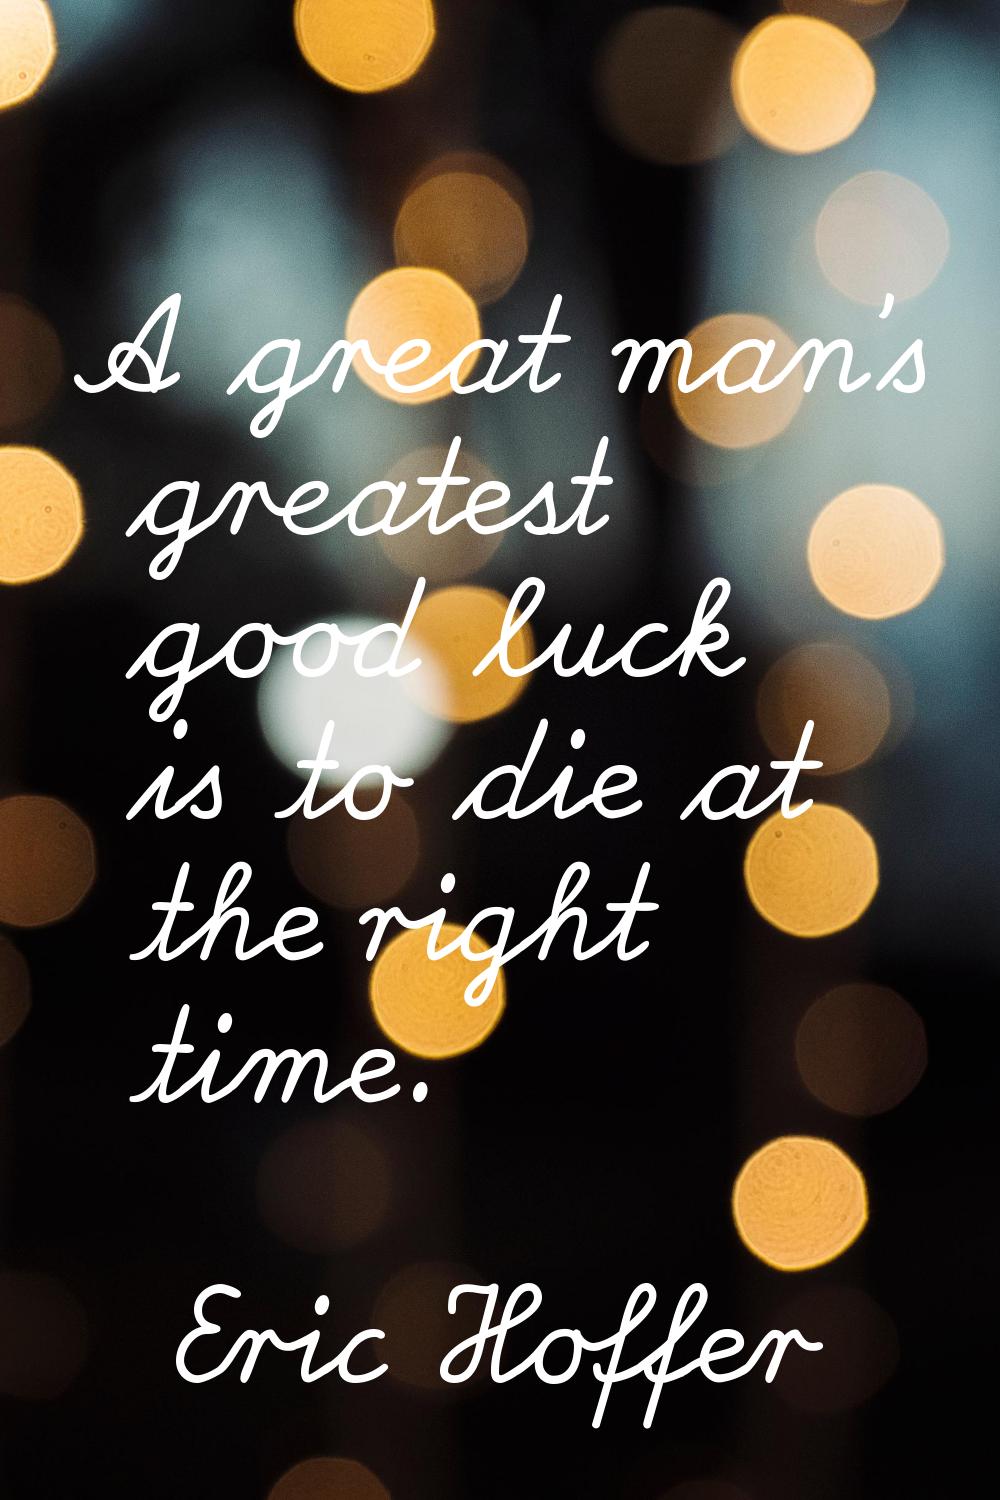 A great man's greatest good luck is to die at the right time.